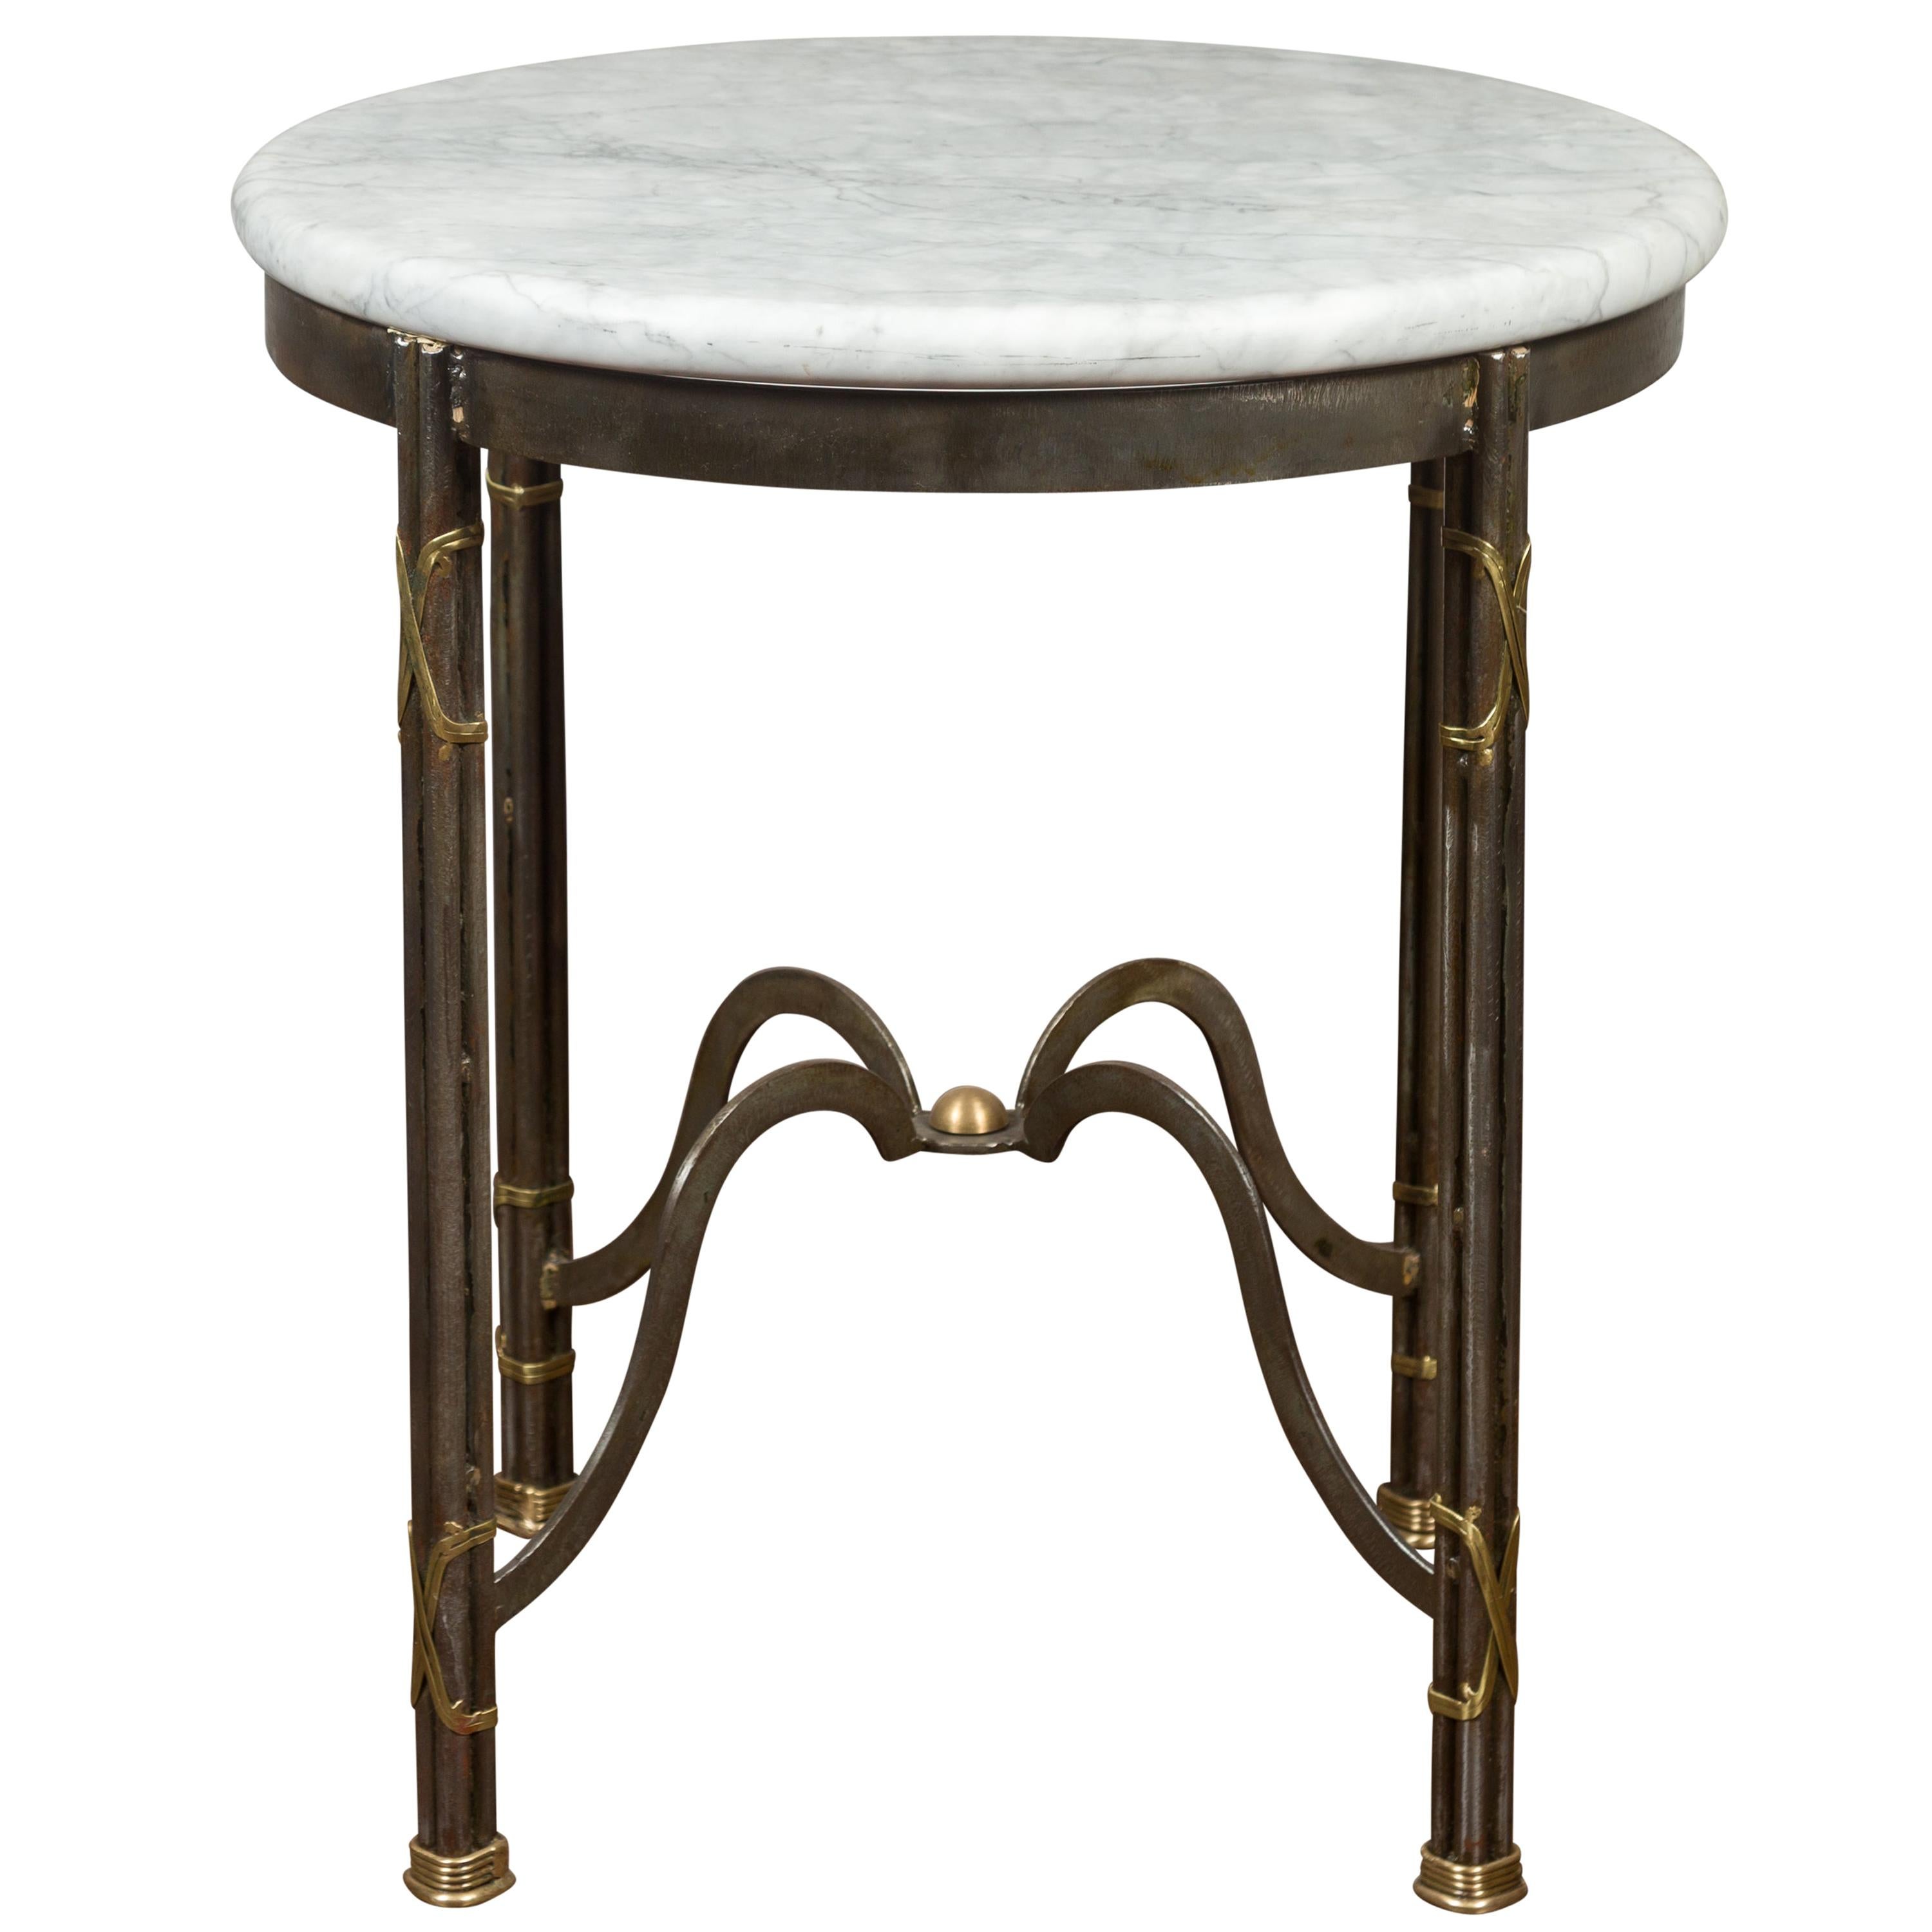 Midcentury French Polished Steel Side Table with Round White Marble Top For Sale